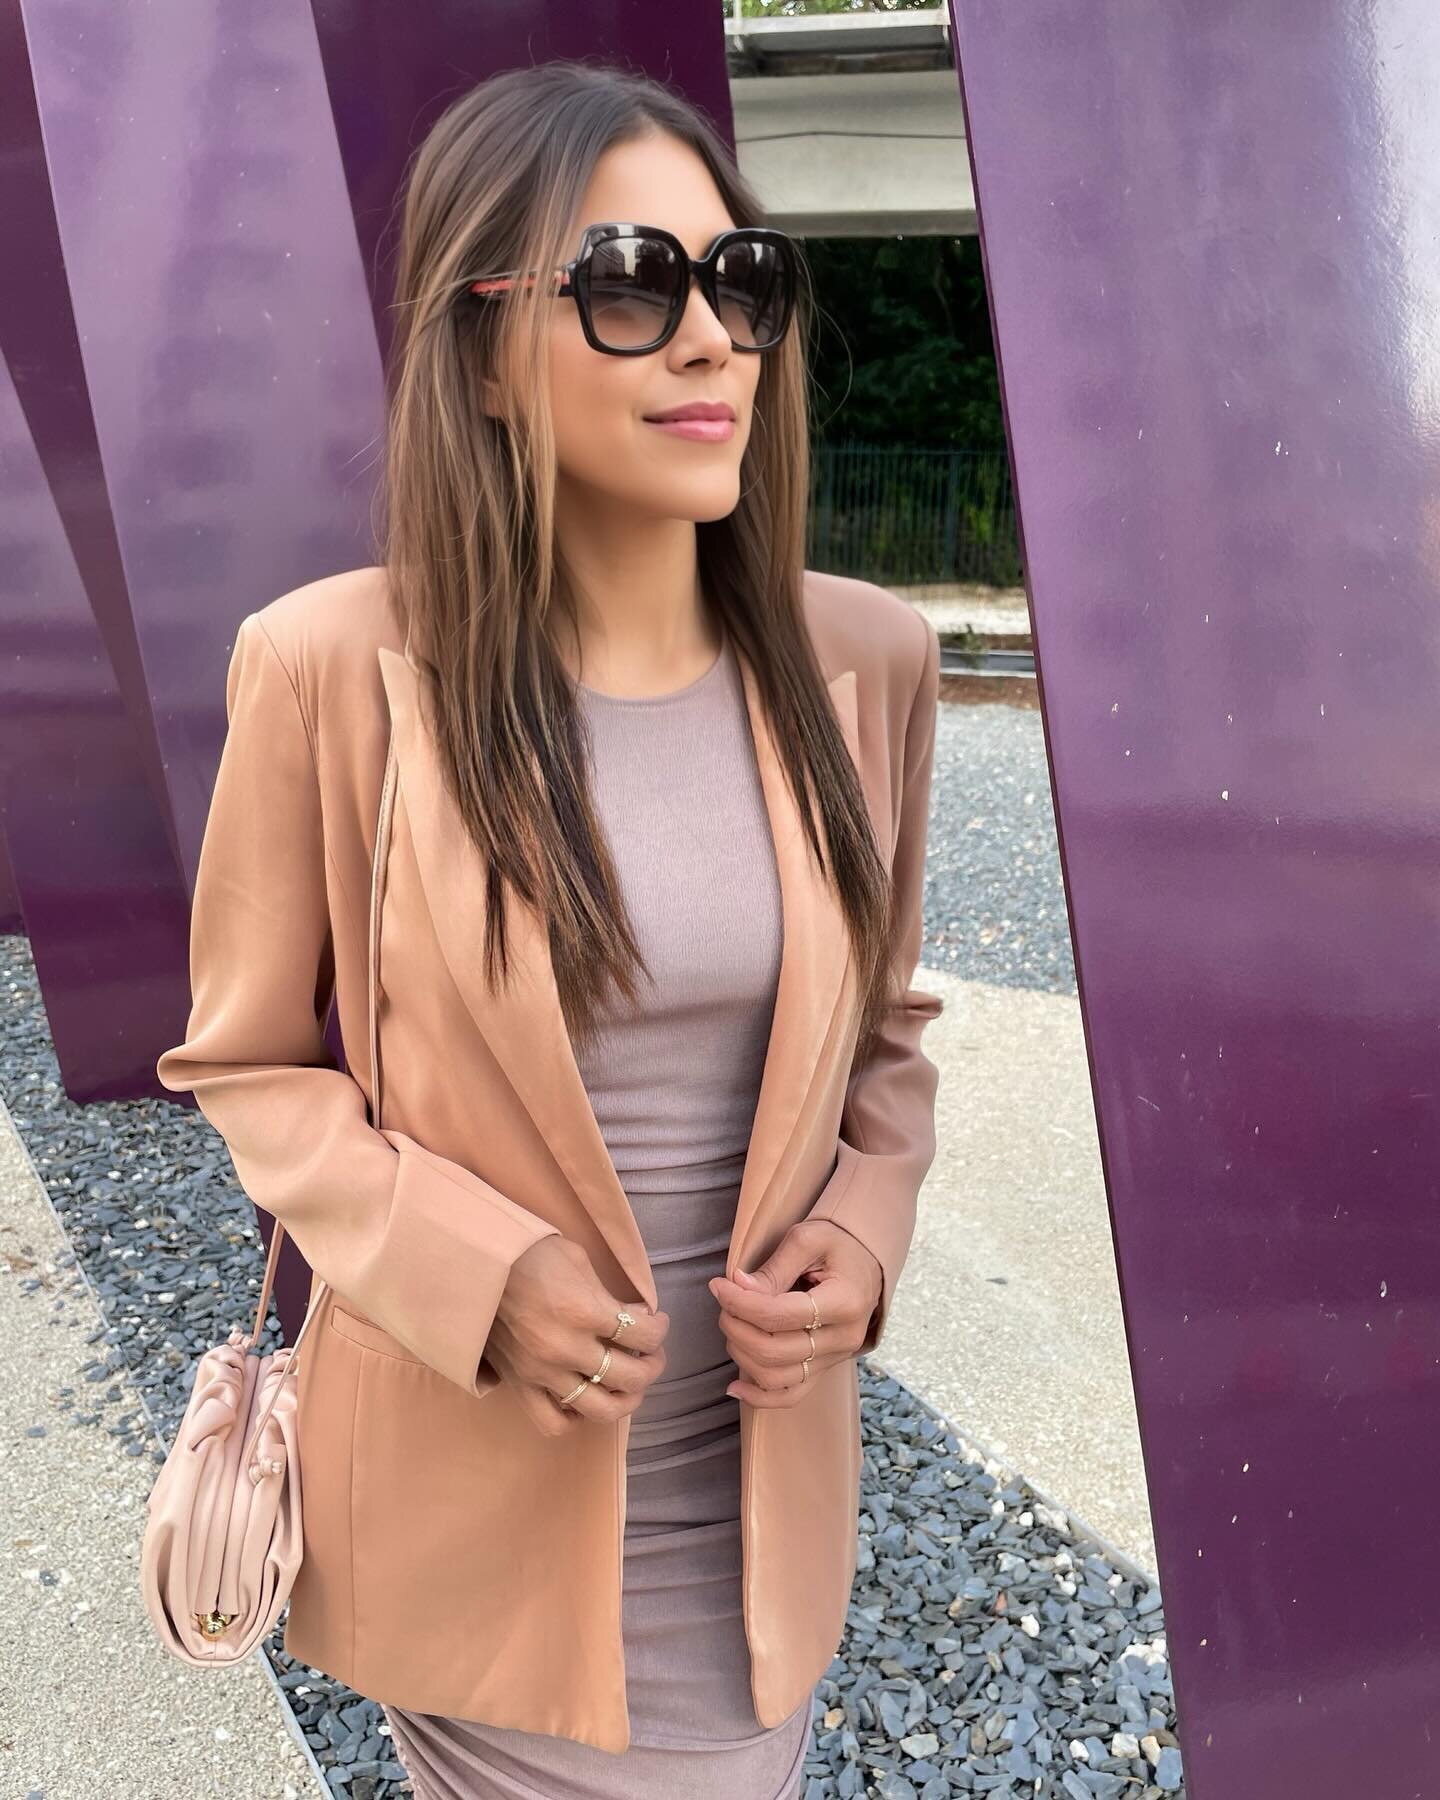 Step into Springtime Bliss with this Gorgeous Ruched Midi Dress in Mushroom Hue from Vici 🌼@vicidolls #SpringEssentials #FashionForward #vicicollection #vici